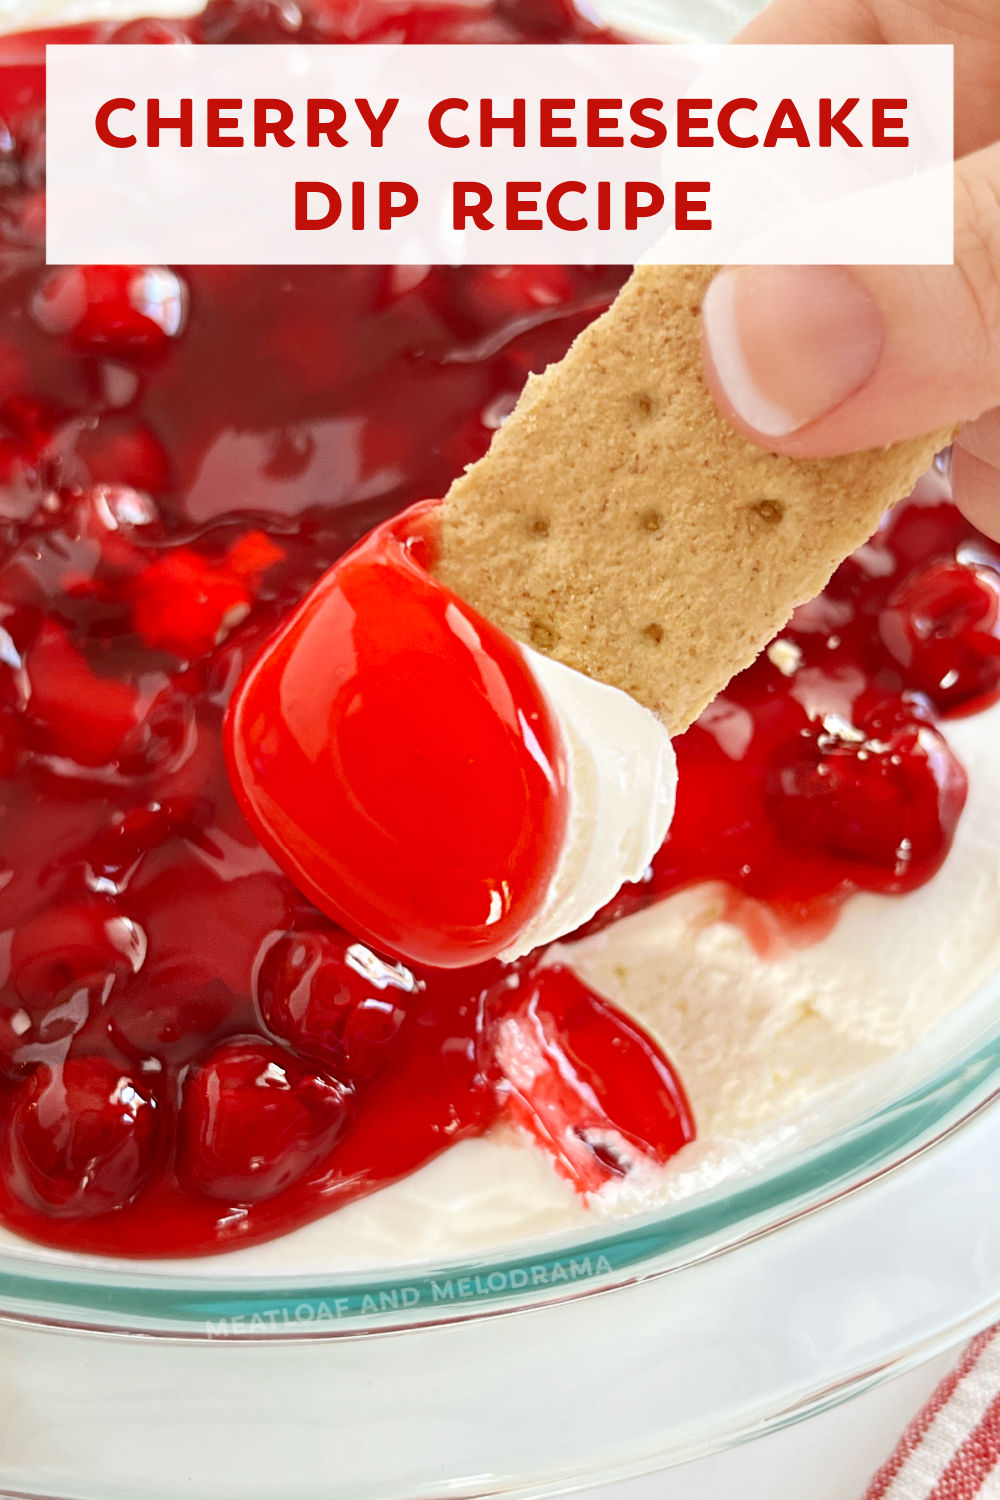 Cherry Cheesecake Dip is a no bake dessert dip made with marshmallow fluff, cream cheese, Cool Whip and pie filling. An easy recipe and a delicious dessert cheesecake lovers will love! via @meamel